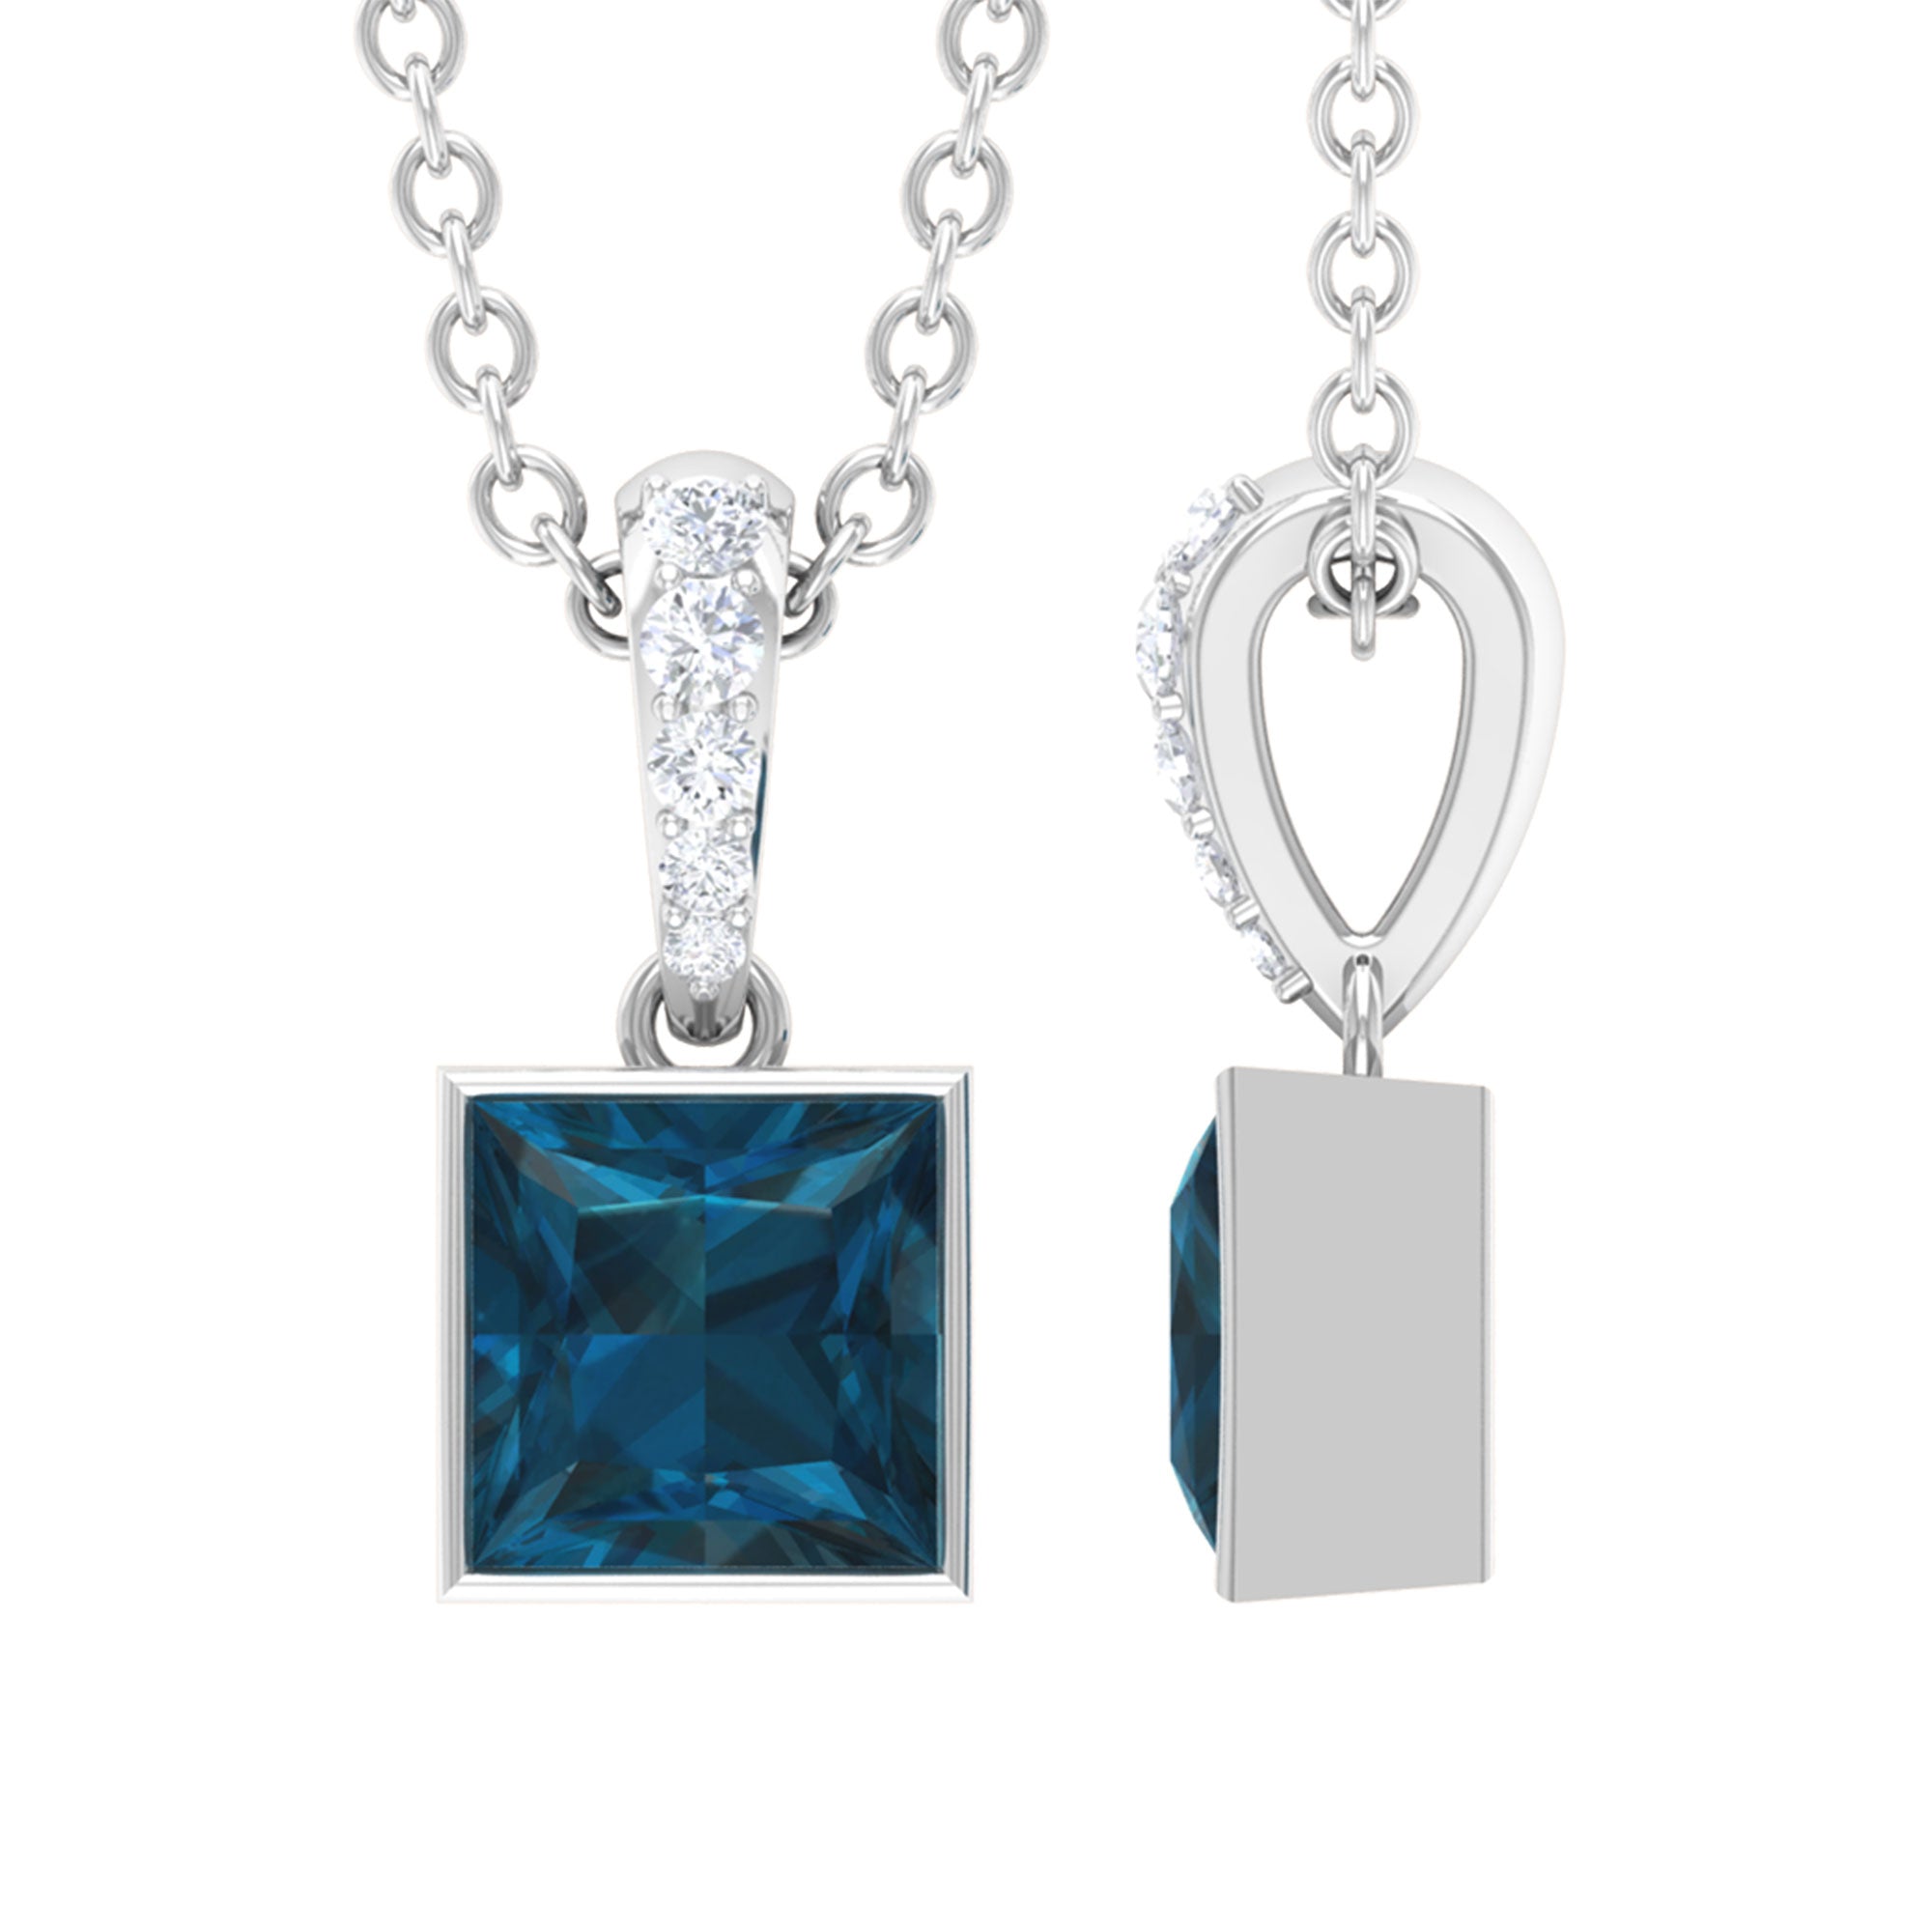 6 MM Princess Cut London Blue Topaz Solitaire Pendant with Diamond Accent Bail London Blue Topaz - ( AAA ) - Quality - Rosec Jewels